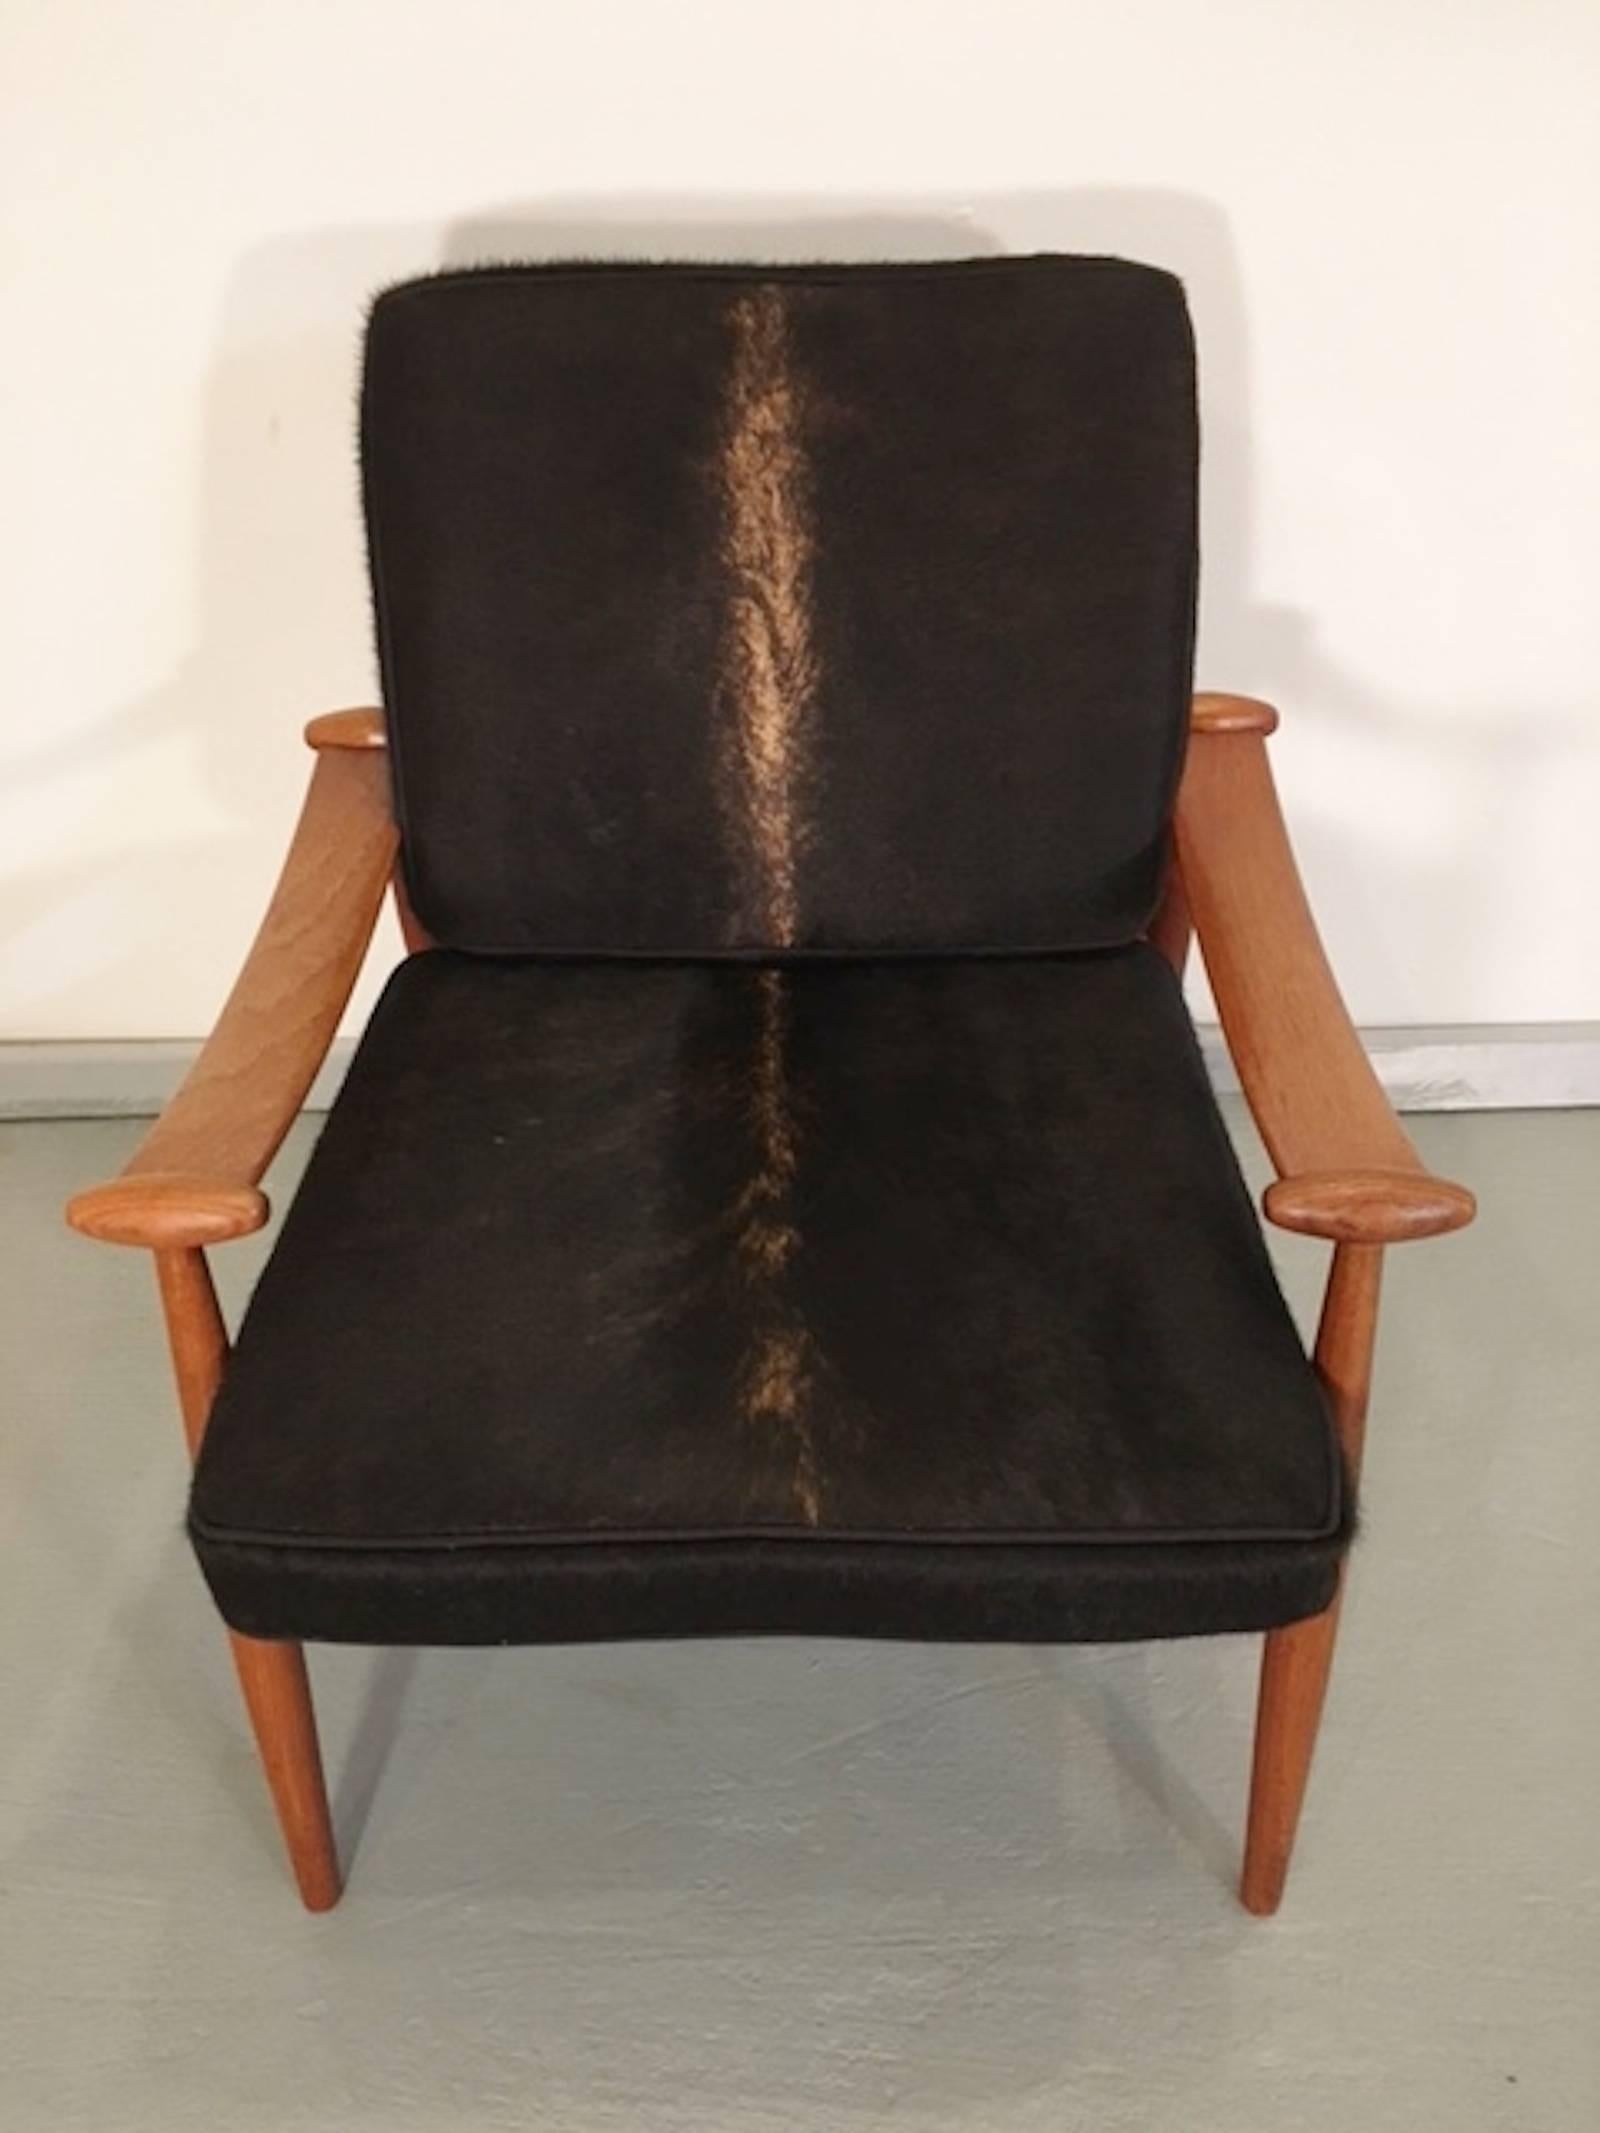 Beautiful armchair by Finn Juhl model FD133 with sculpted arms and turned legs. Often referred to as the 'Spade' chair, this is a great example of Danish Mid-Century Modern design. Covered in deep color cowhide.

(Please confirm item location with